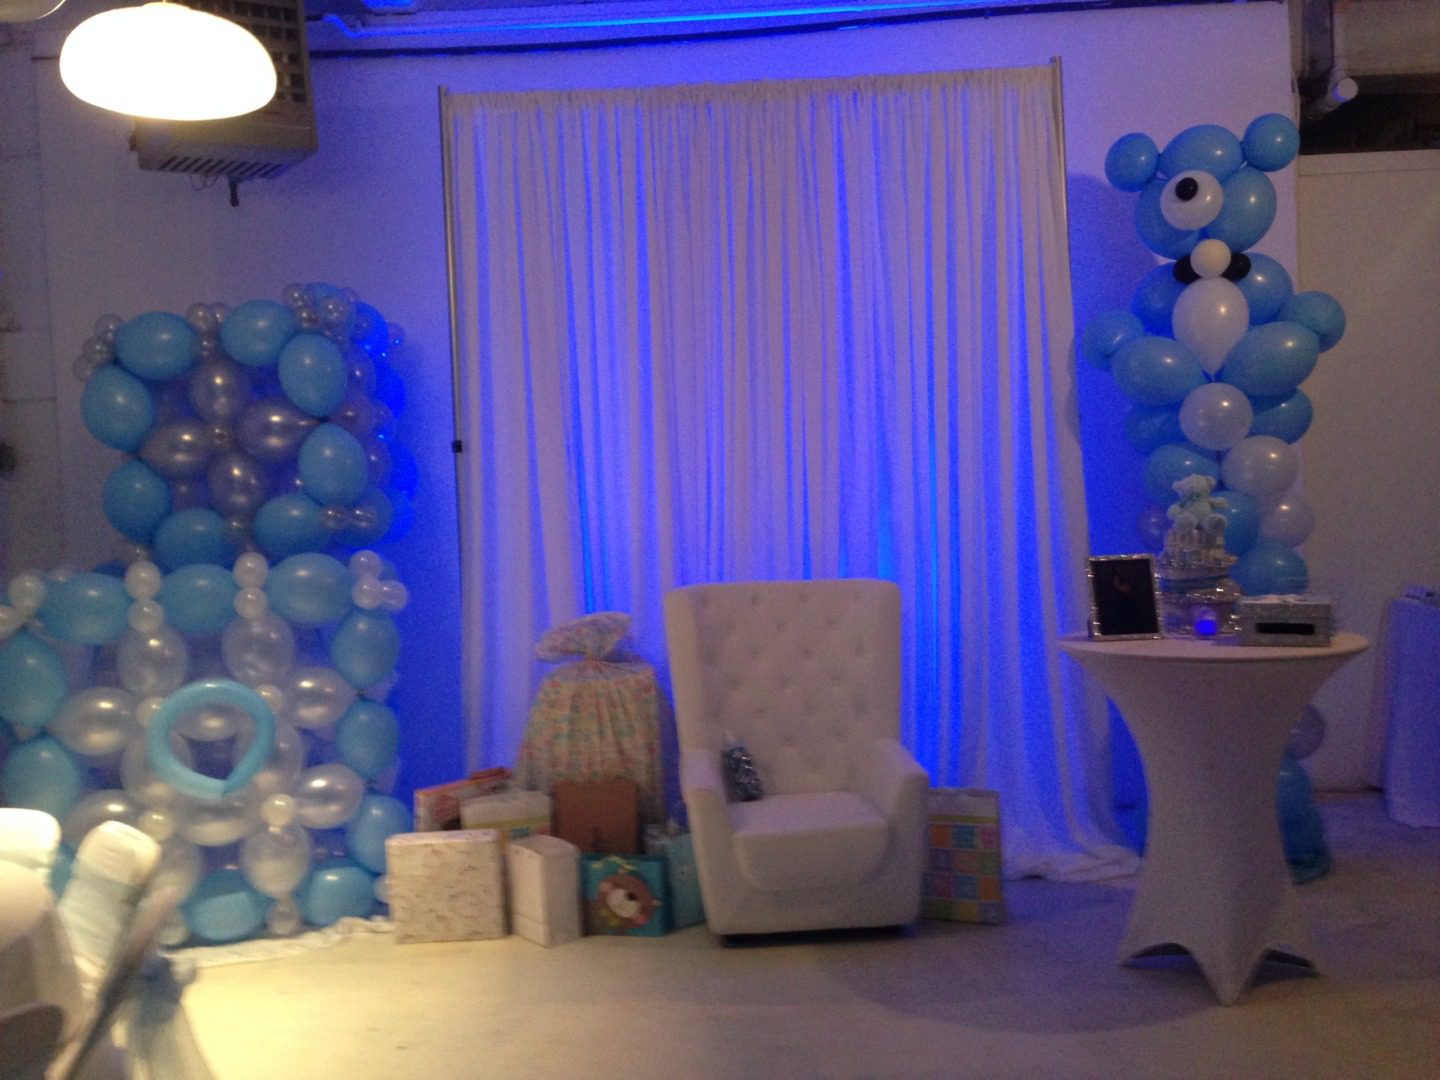 A room with blue and white balloons on the wall